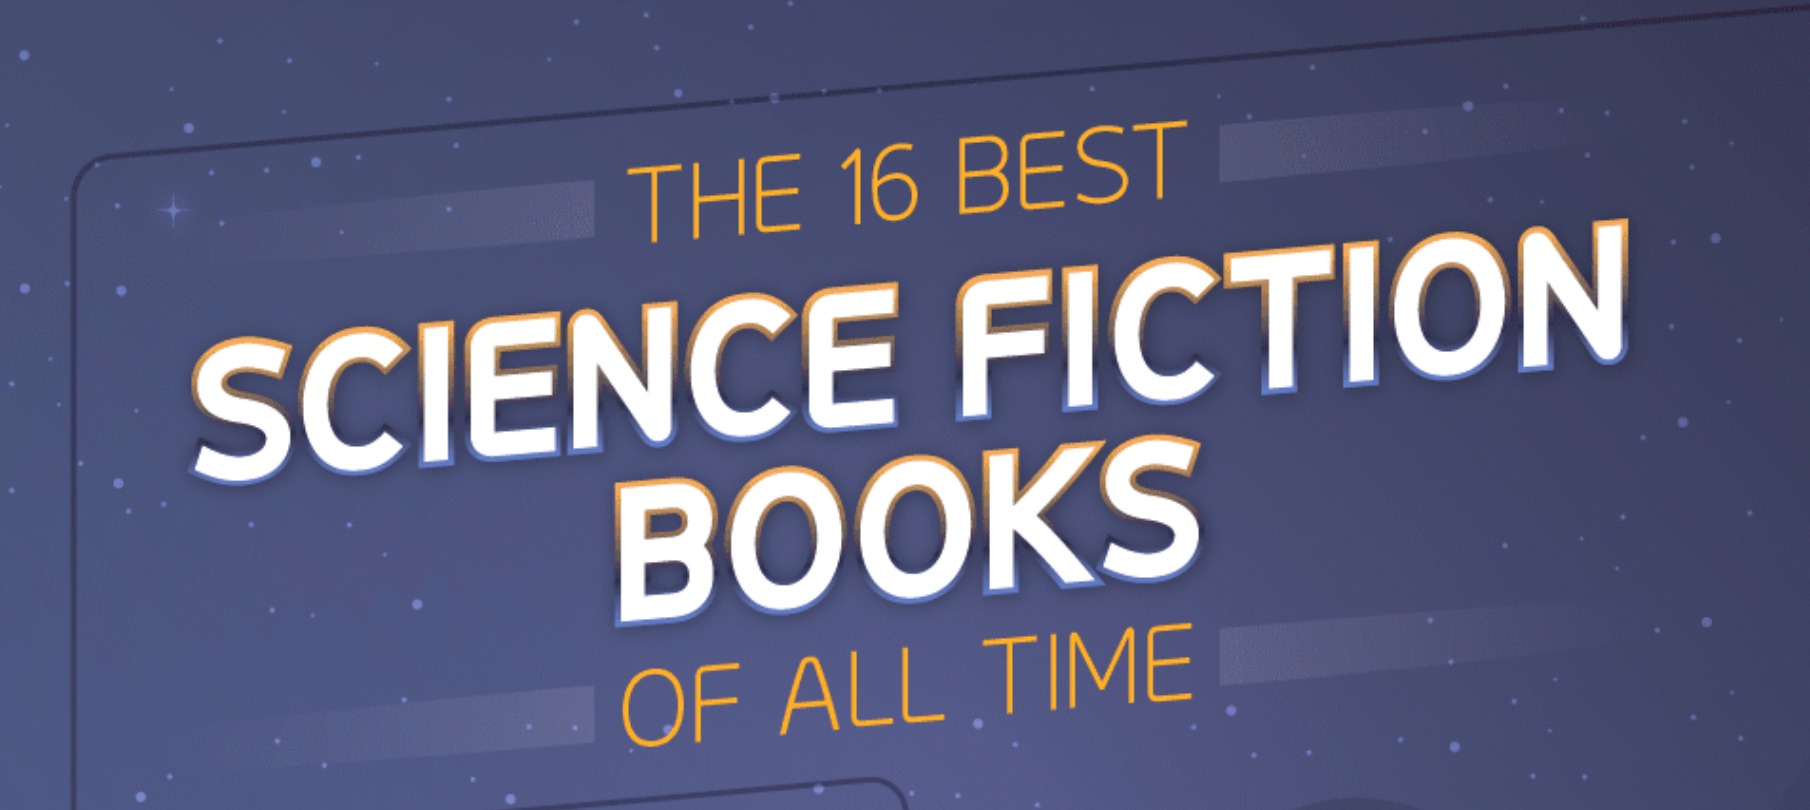 Top 16 Science Fiction Books of All Time